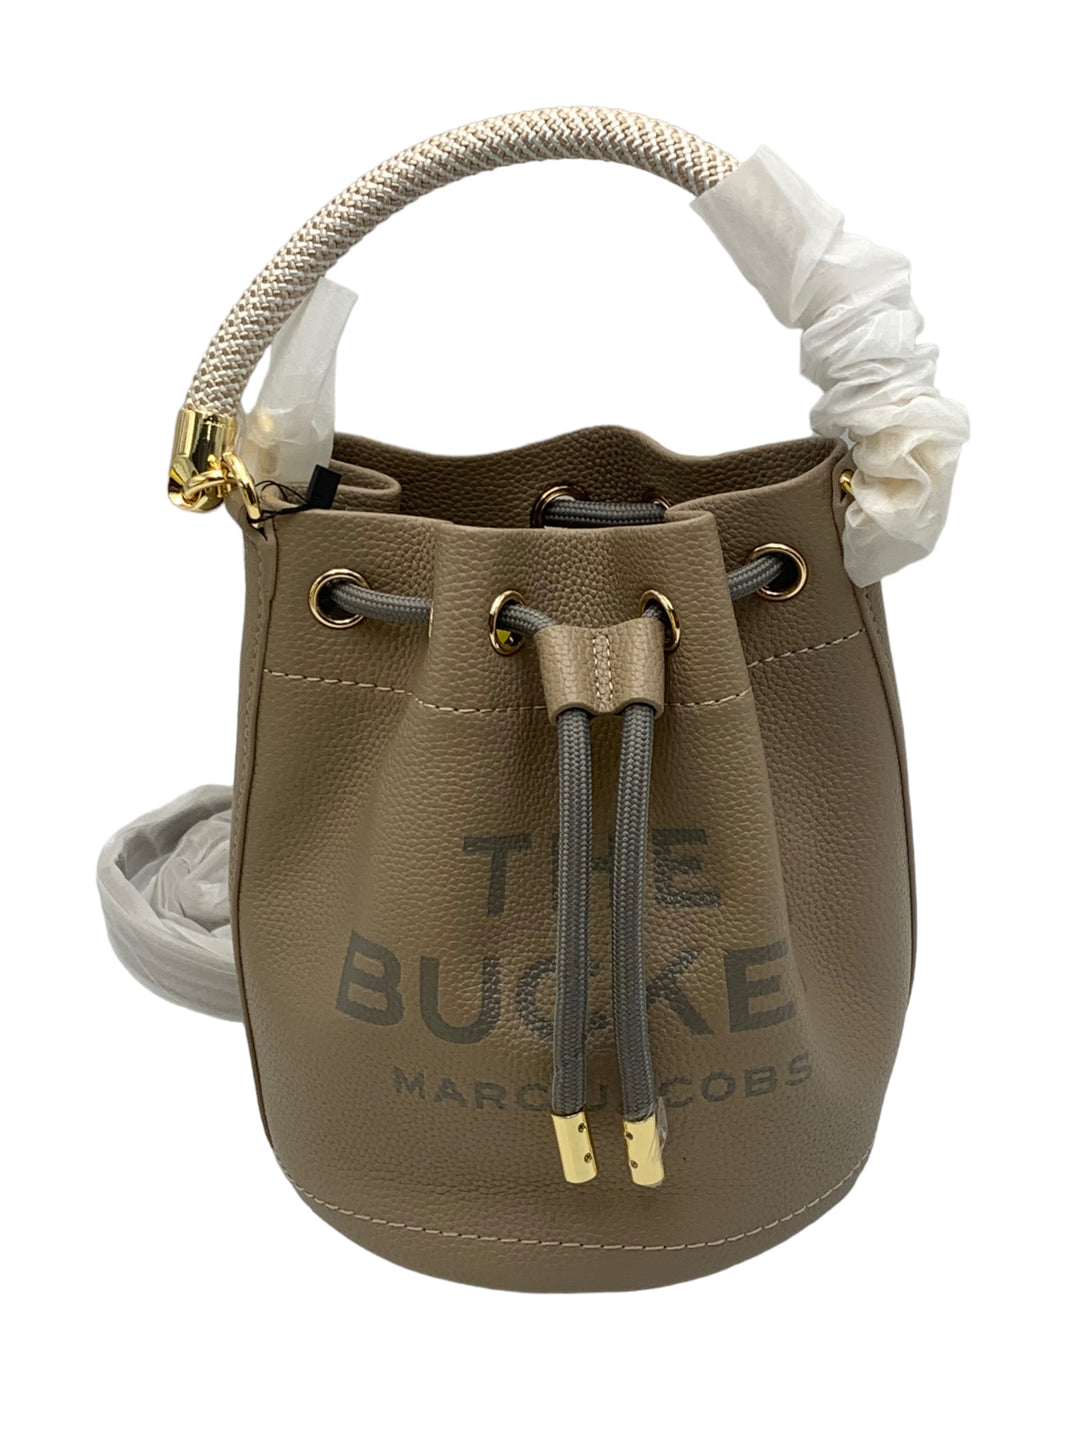 Marc Jacobs The Bucket Bag - Cement